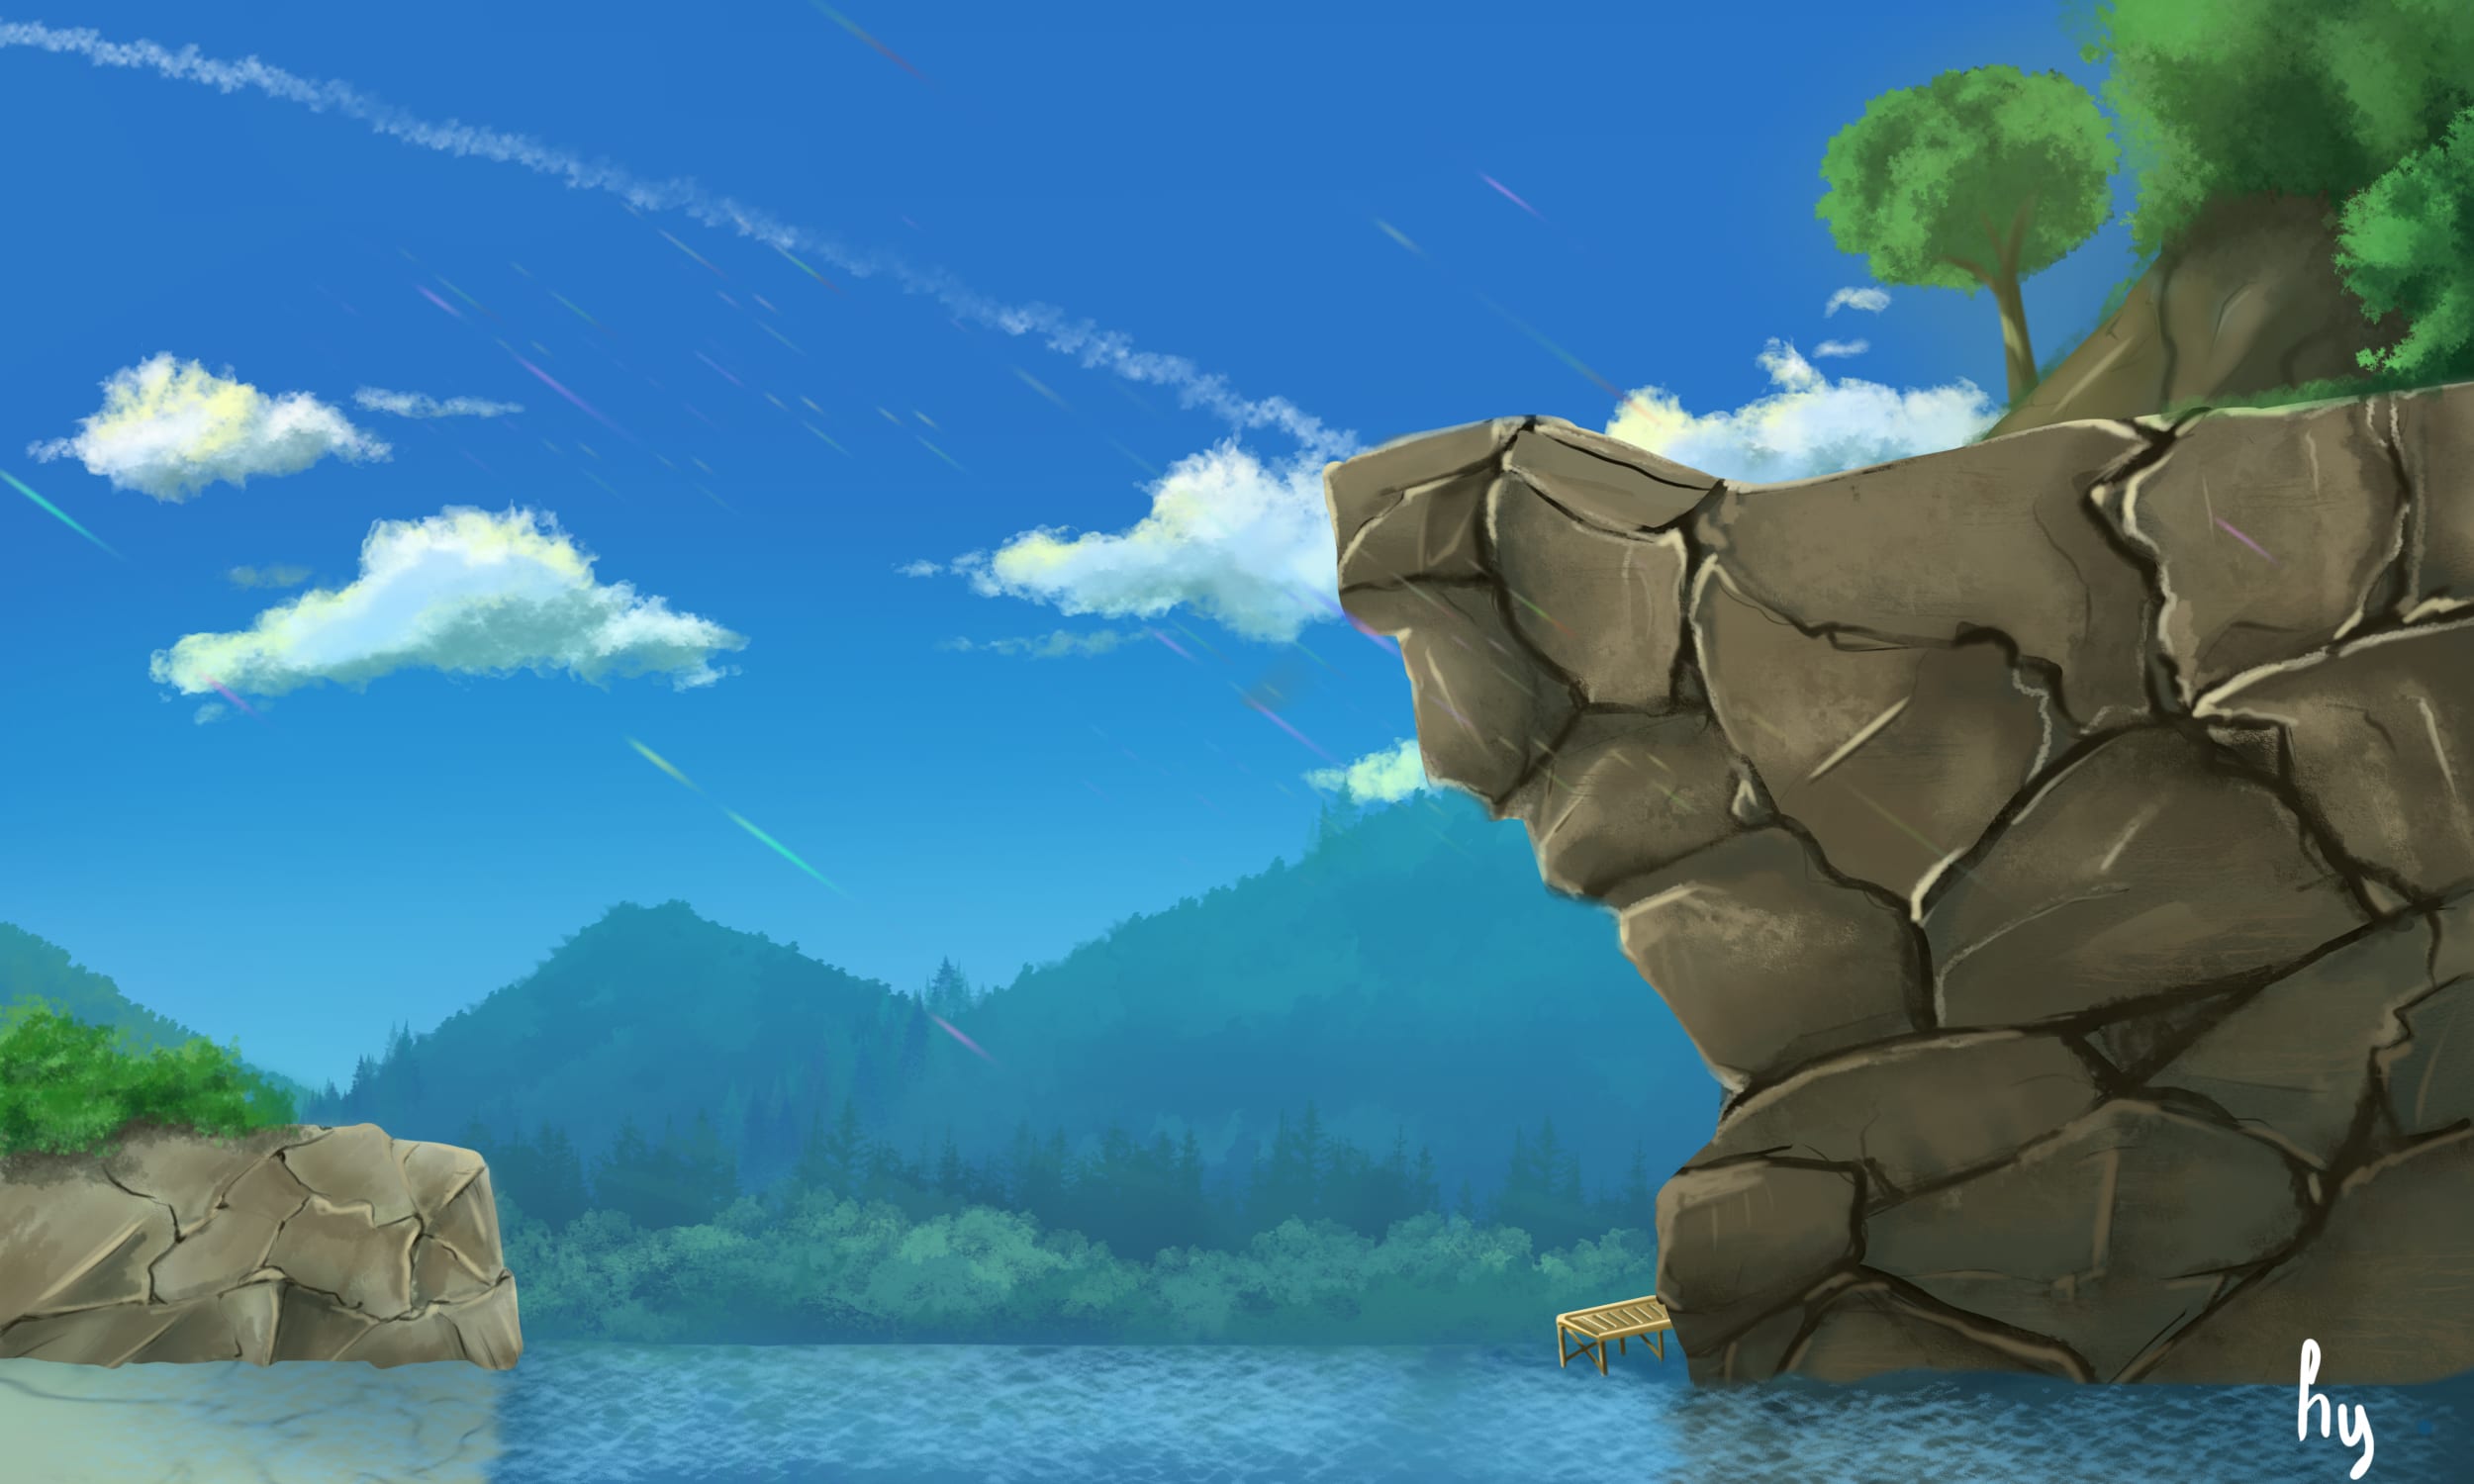 Do background, scenery in anime style by Yhernhenry | Fiverr